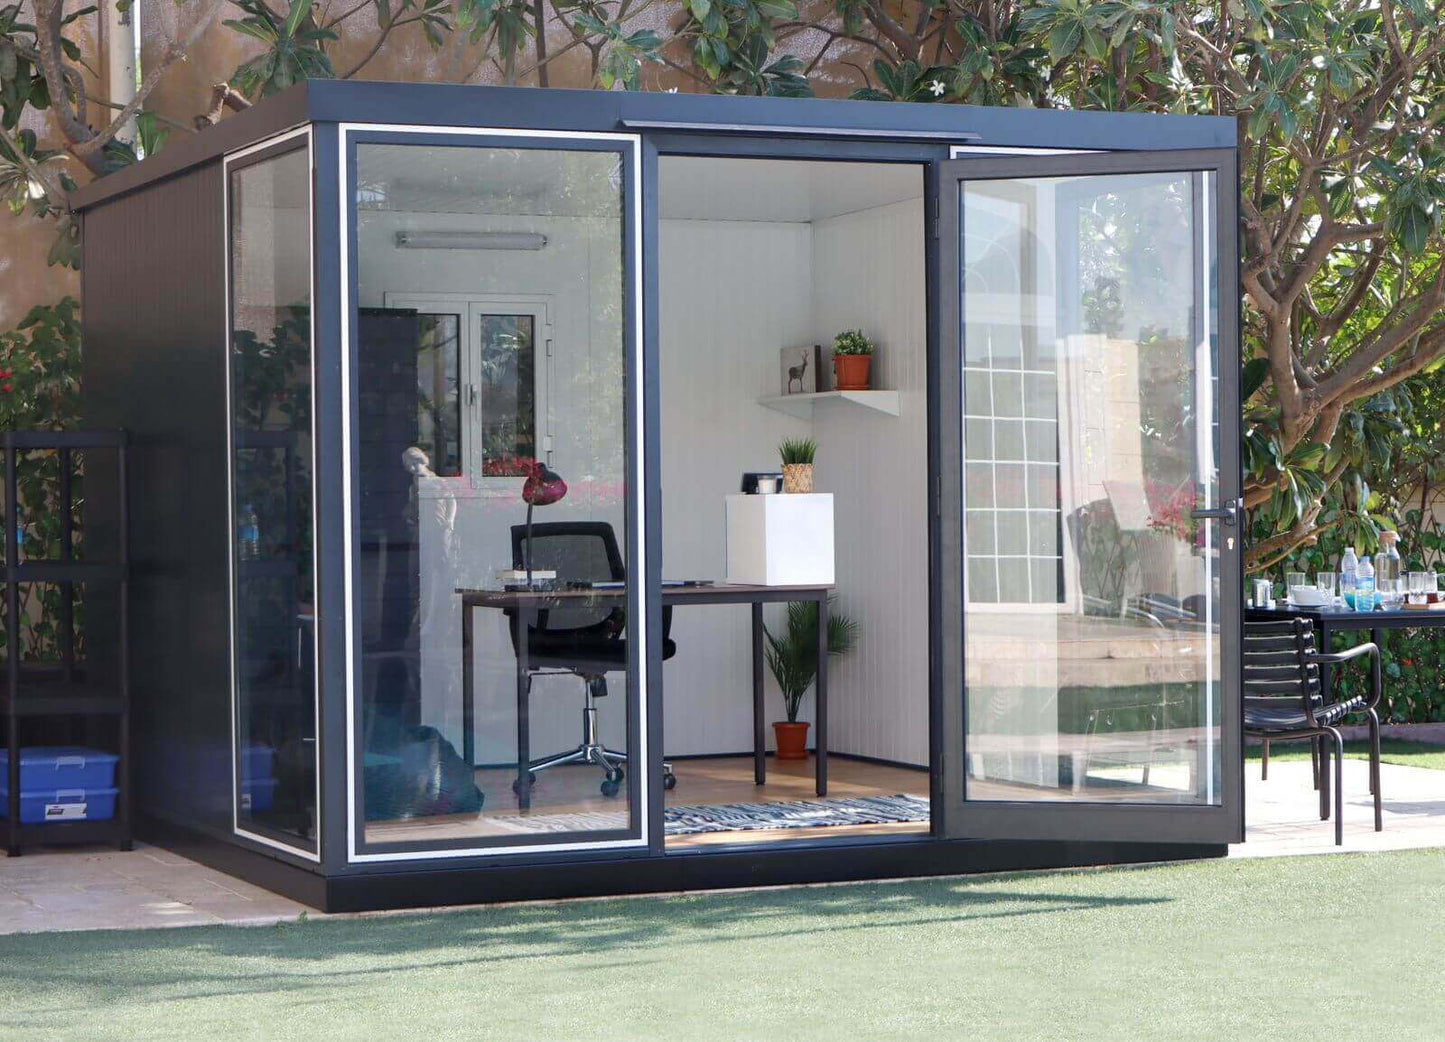 Duramax 10' x 10' Insulated Garden Glass Room Building 32001 front view set up like office